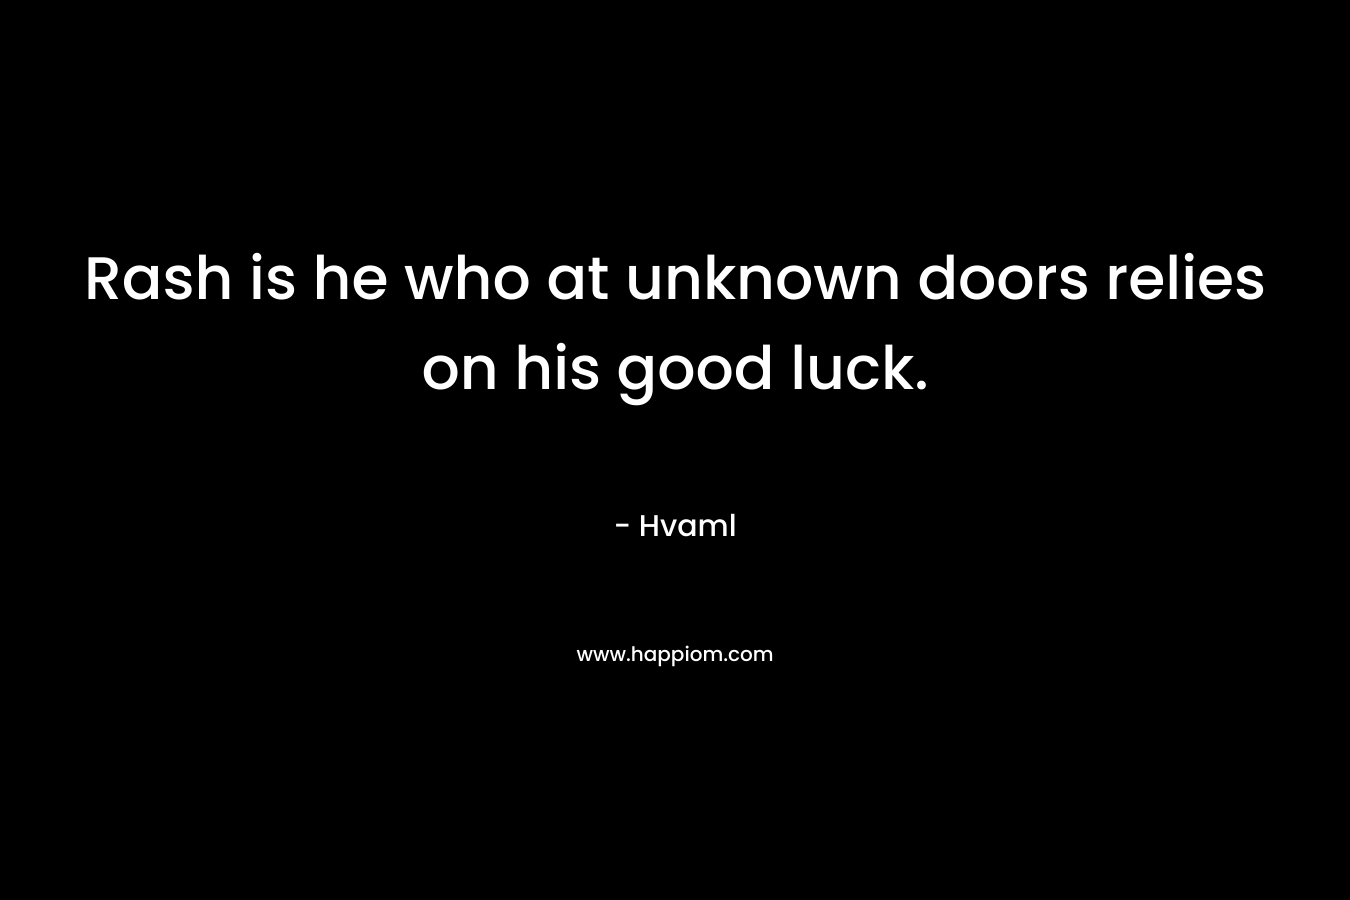 Rash is he who at unknown doors relies on his good luck. – Hvaml